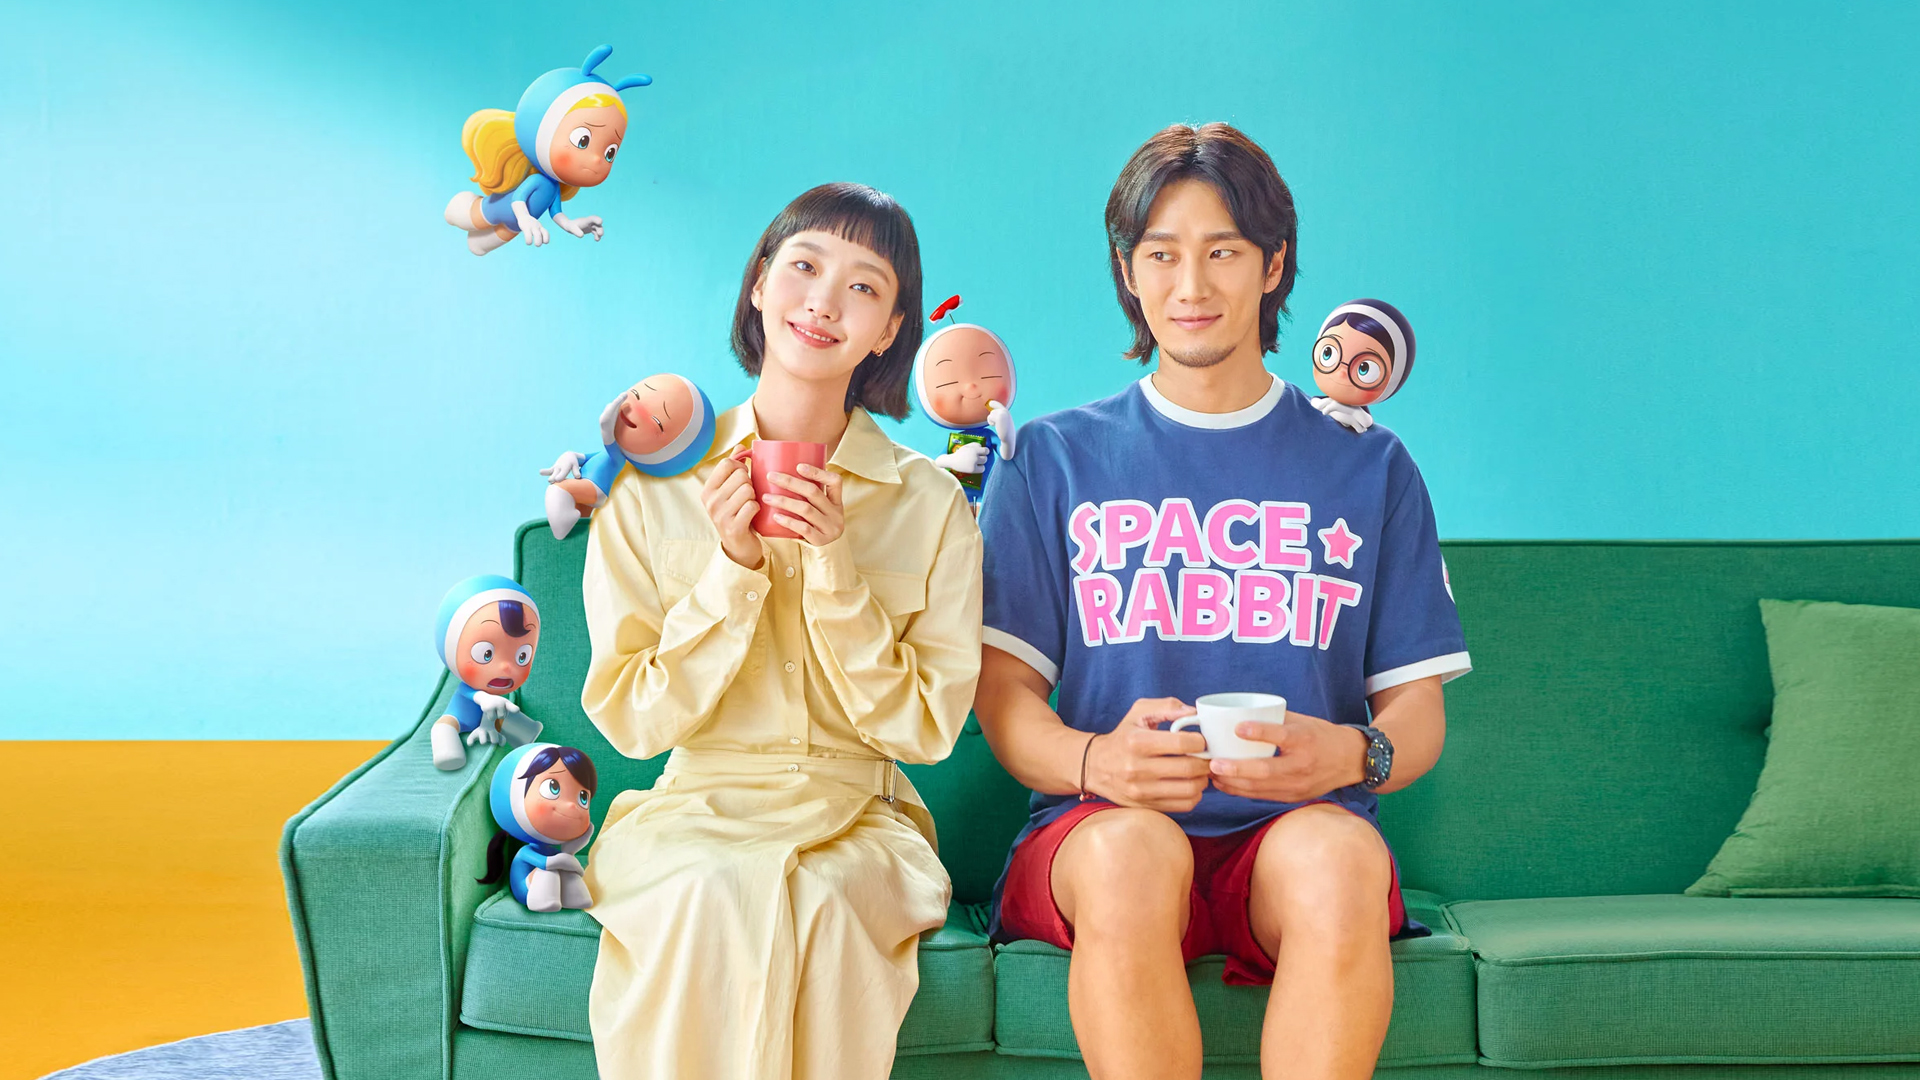 Good Ol’ Review: Kim Go Eun, Ahn Bo Hyun and “Yumi’s Cells” Come Together for an Endearing, Whimsical Slice of Life